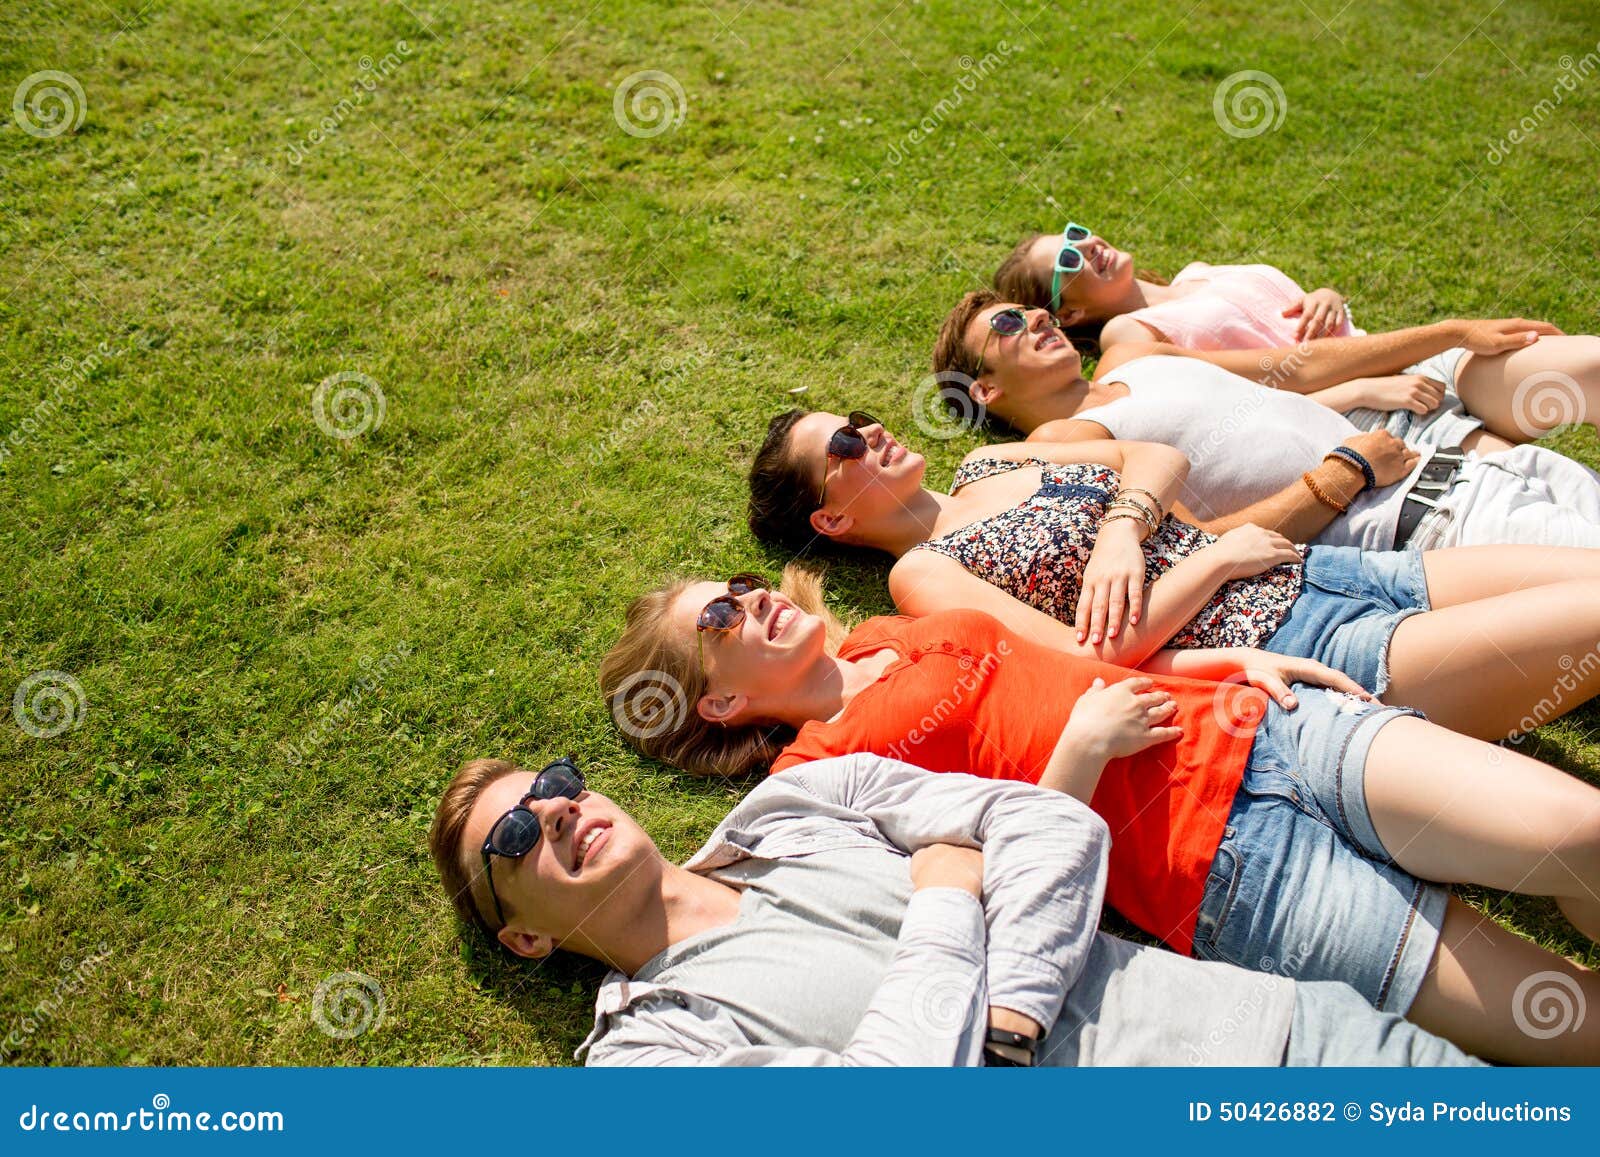 Group Of Smiling Friends Lying On Grass Outdoors Stock Photo Image Of